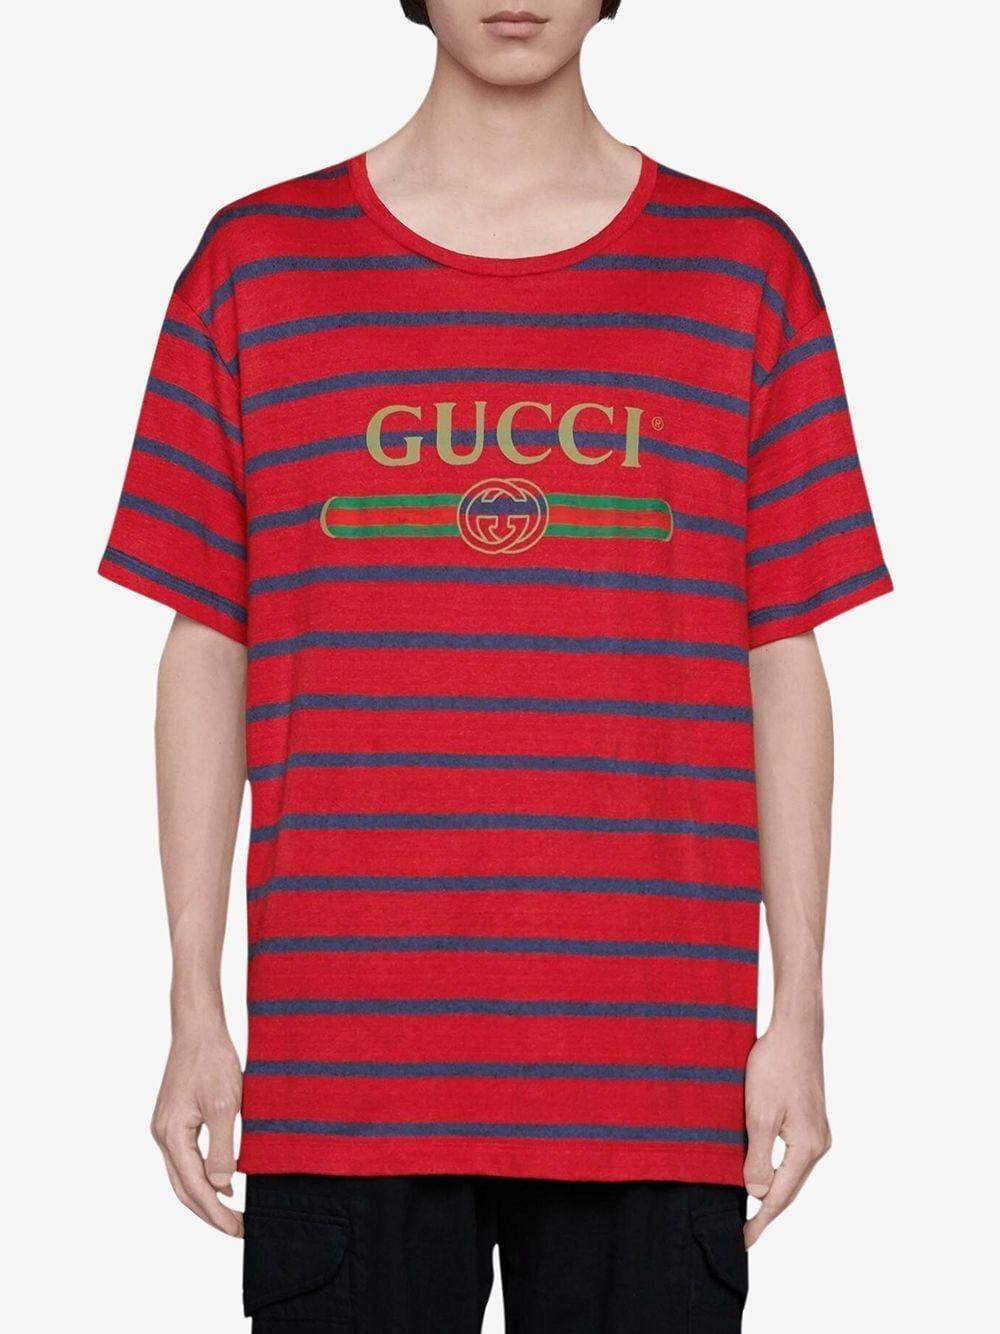 Gucci Logo Striped T-shirt in Red for Men | Lyst